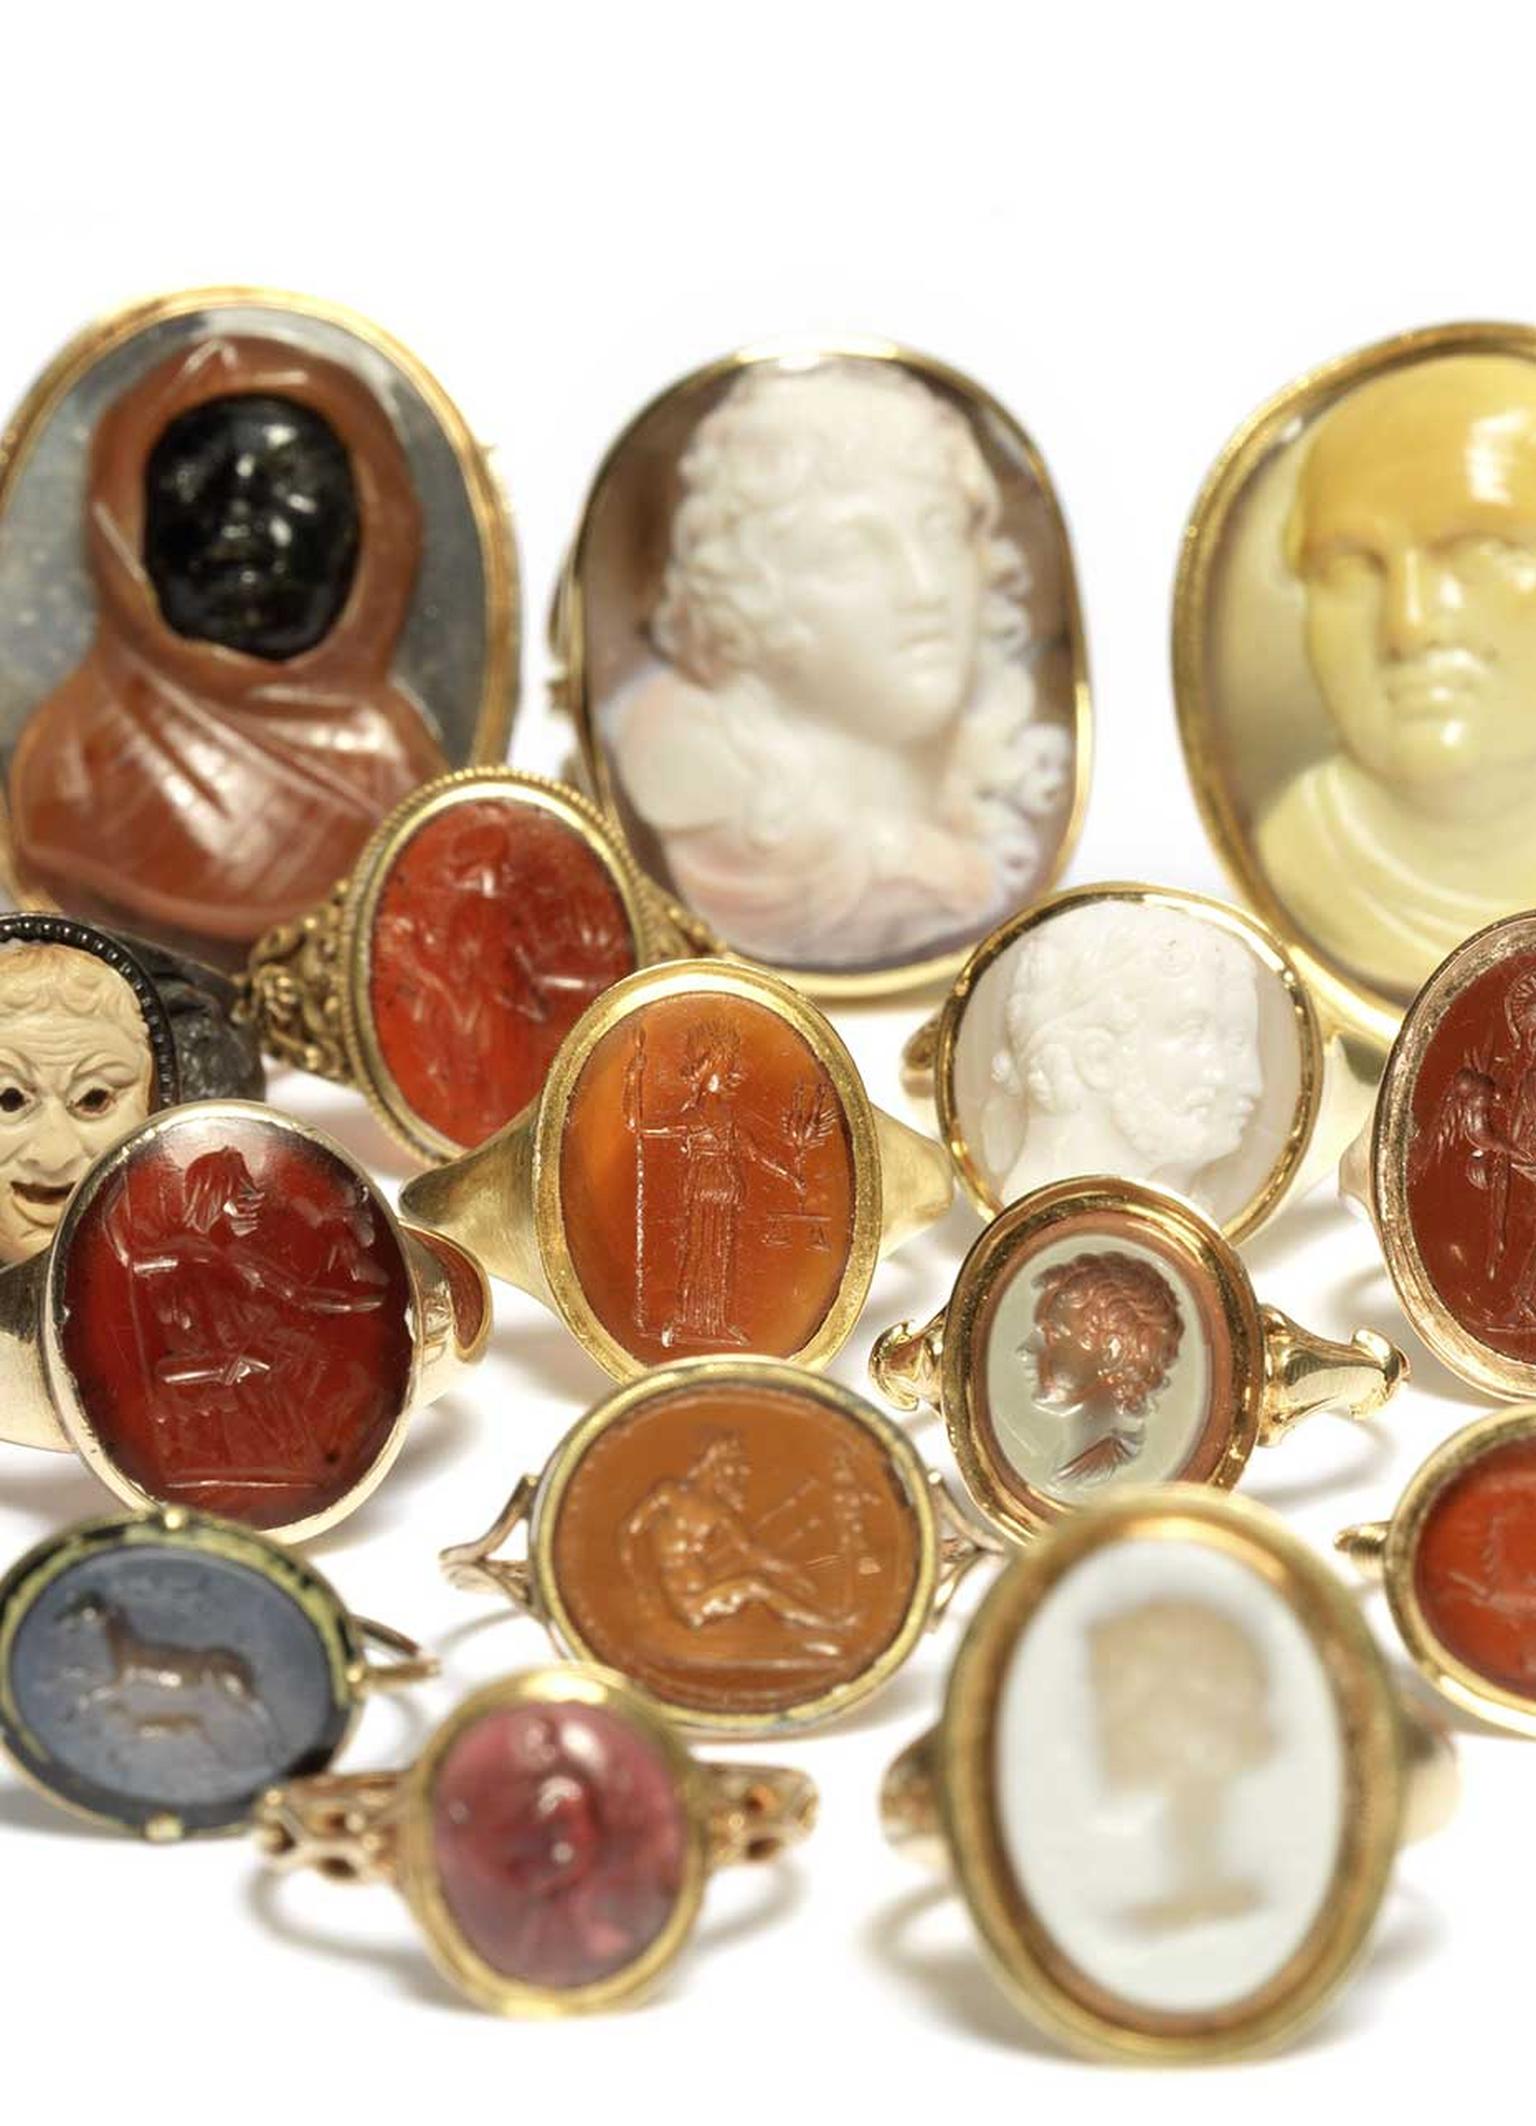 The Ceres Collection of 101 engraved cameo and intaglio rings that date back from as early as the 4th Century BC will be auctioned by Bonhams London this September.